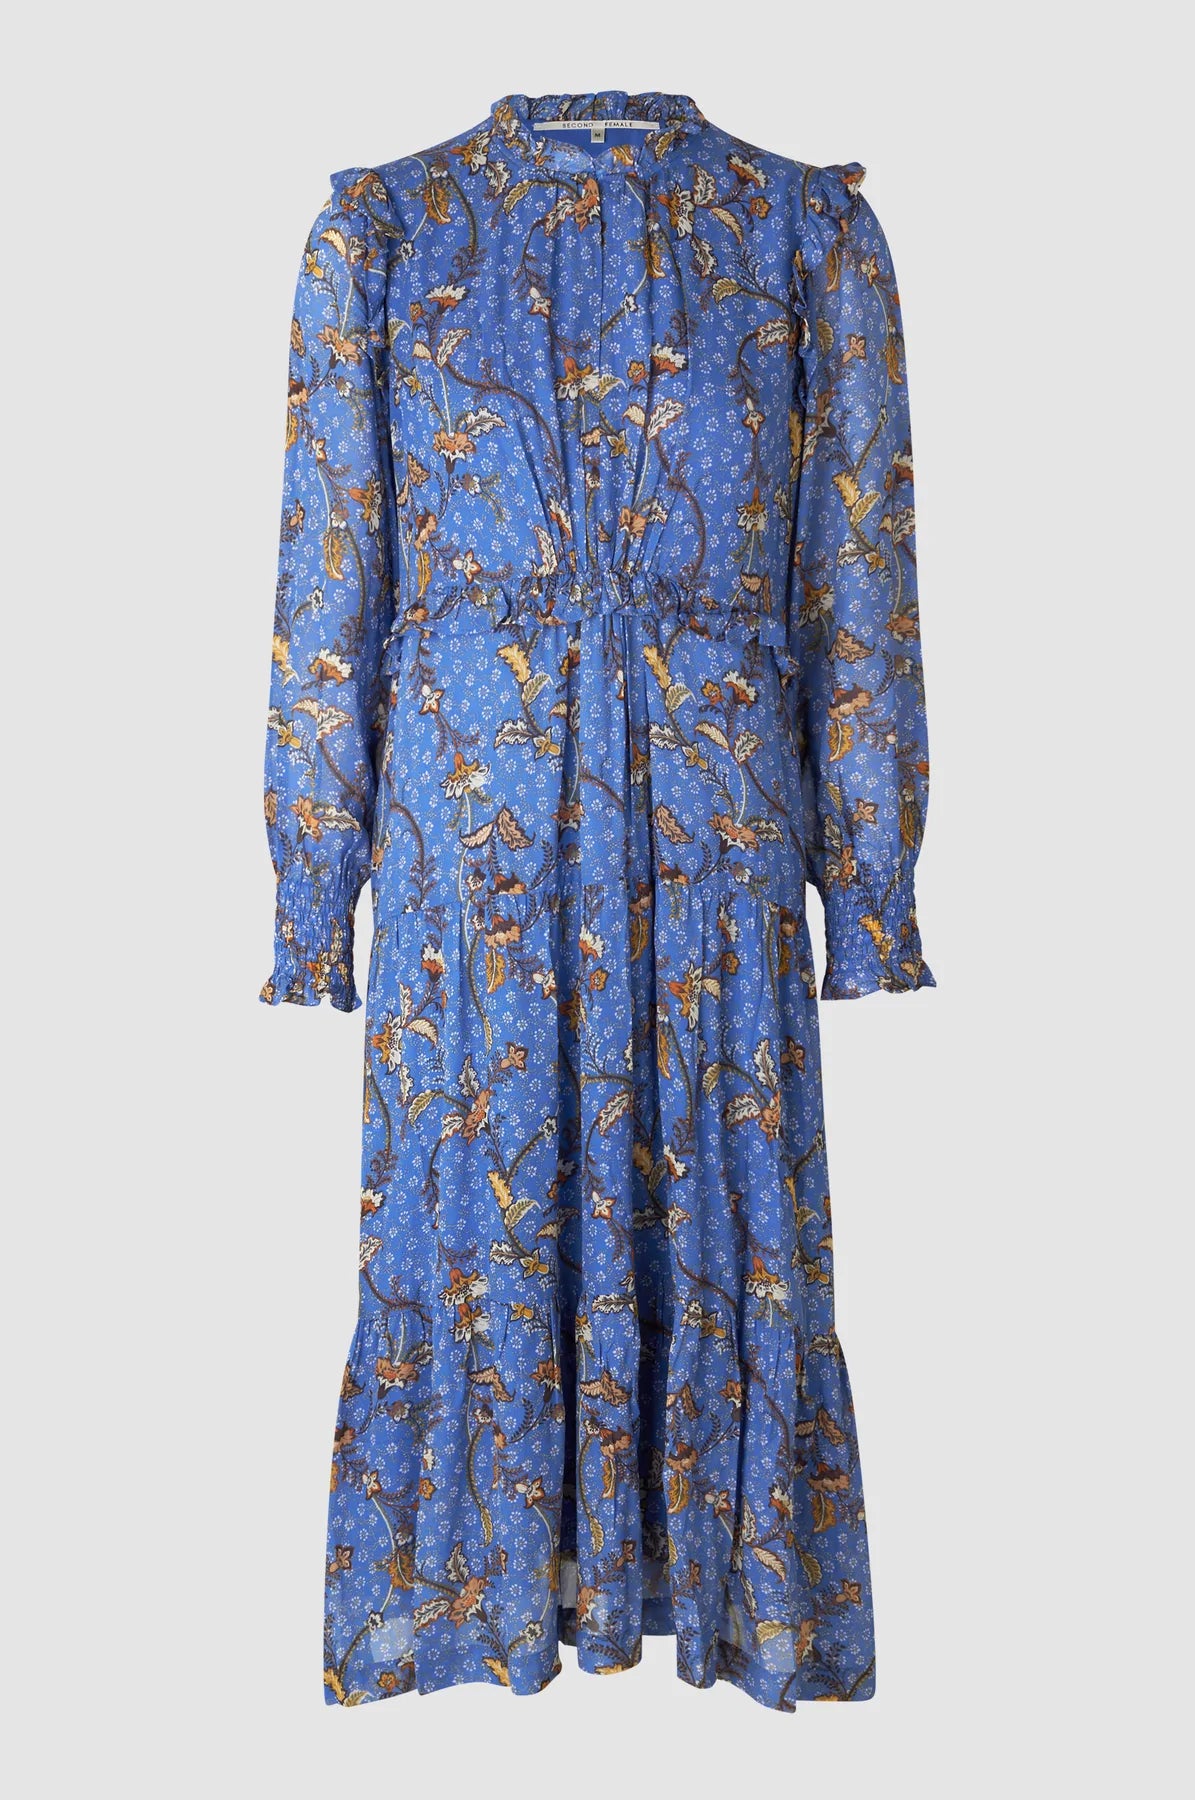 Cornflower blue with rust leaf all over print midi dress with small ruffle details around the collar waist and shoulders, long sleeves with shirred cuffs, V neckline and elasticated waist